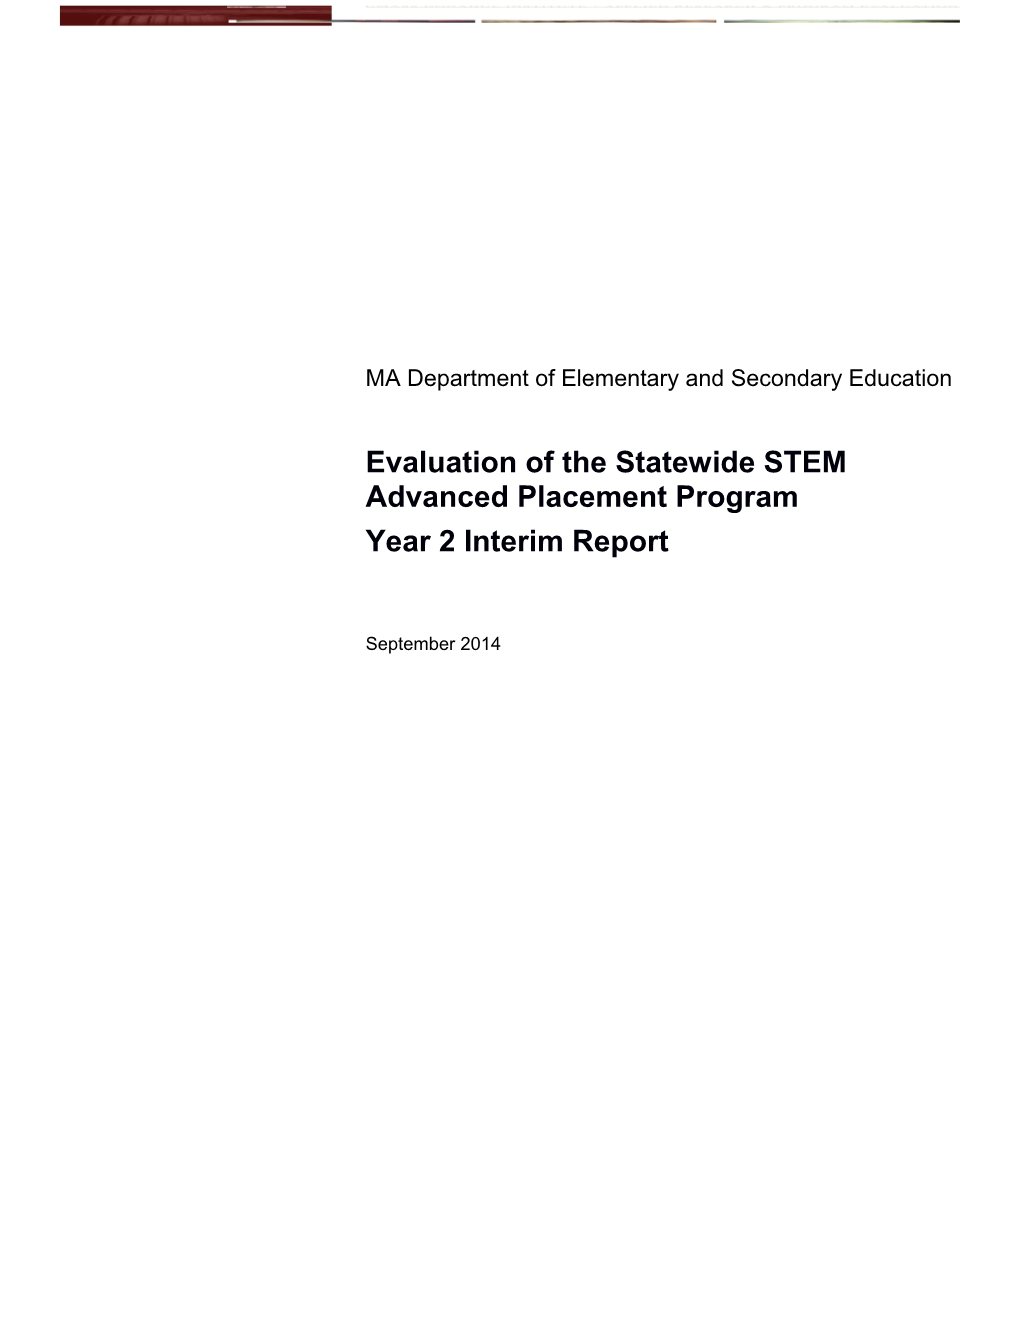 Evaluation of the Statewide STEM Advanced Placement Program: Year 2 Interim Report